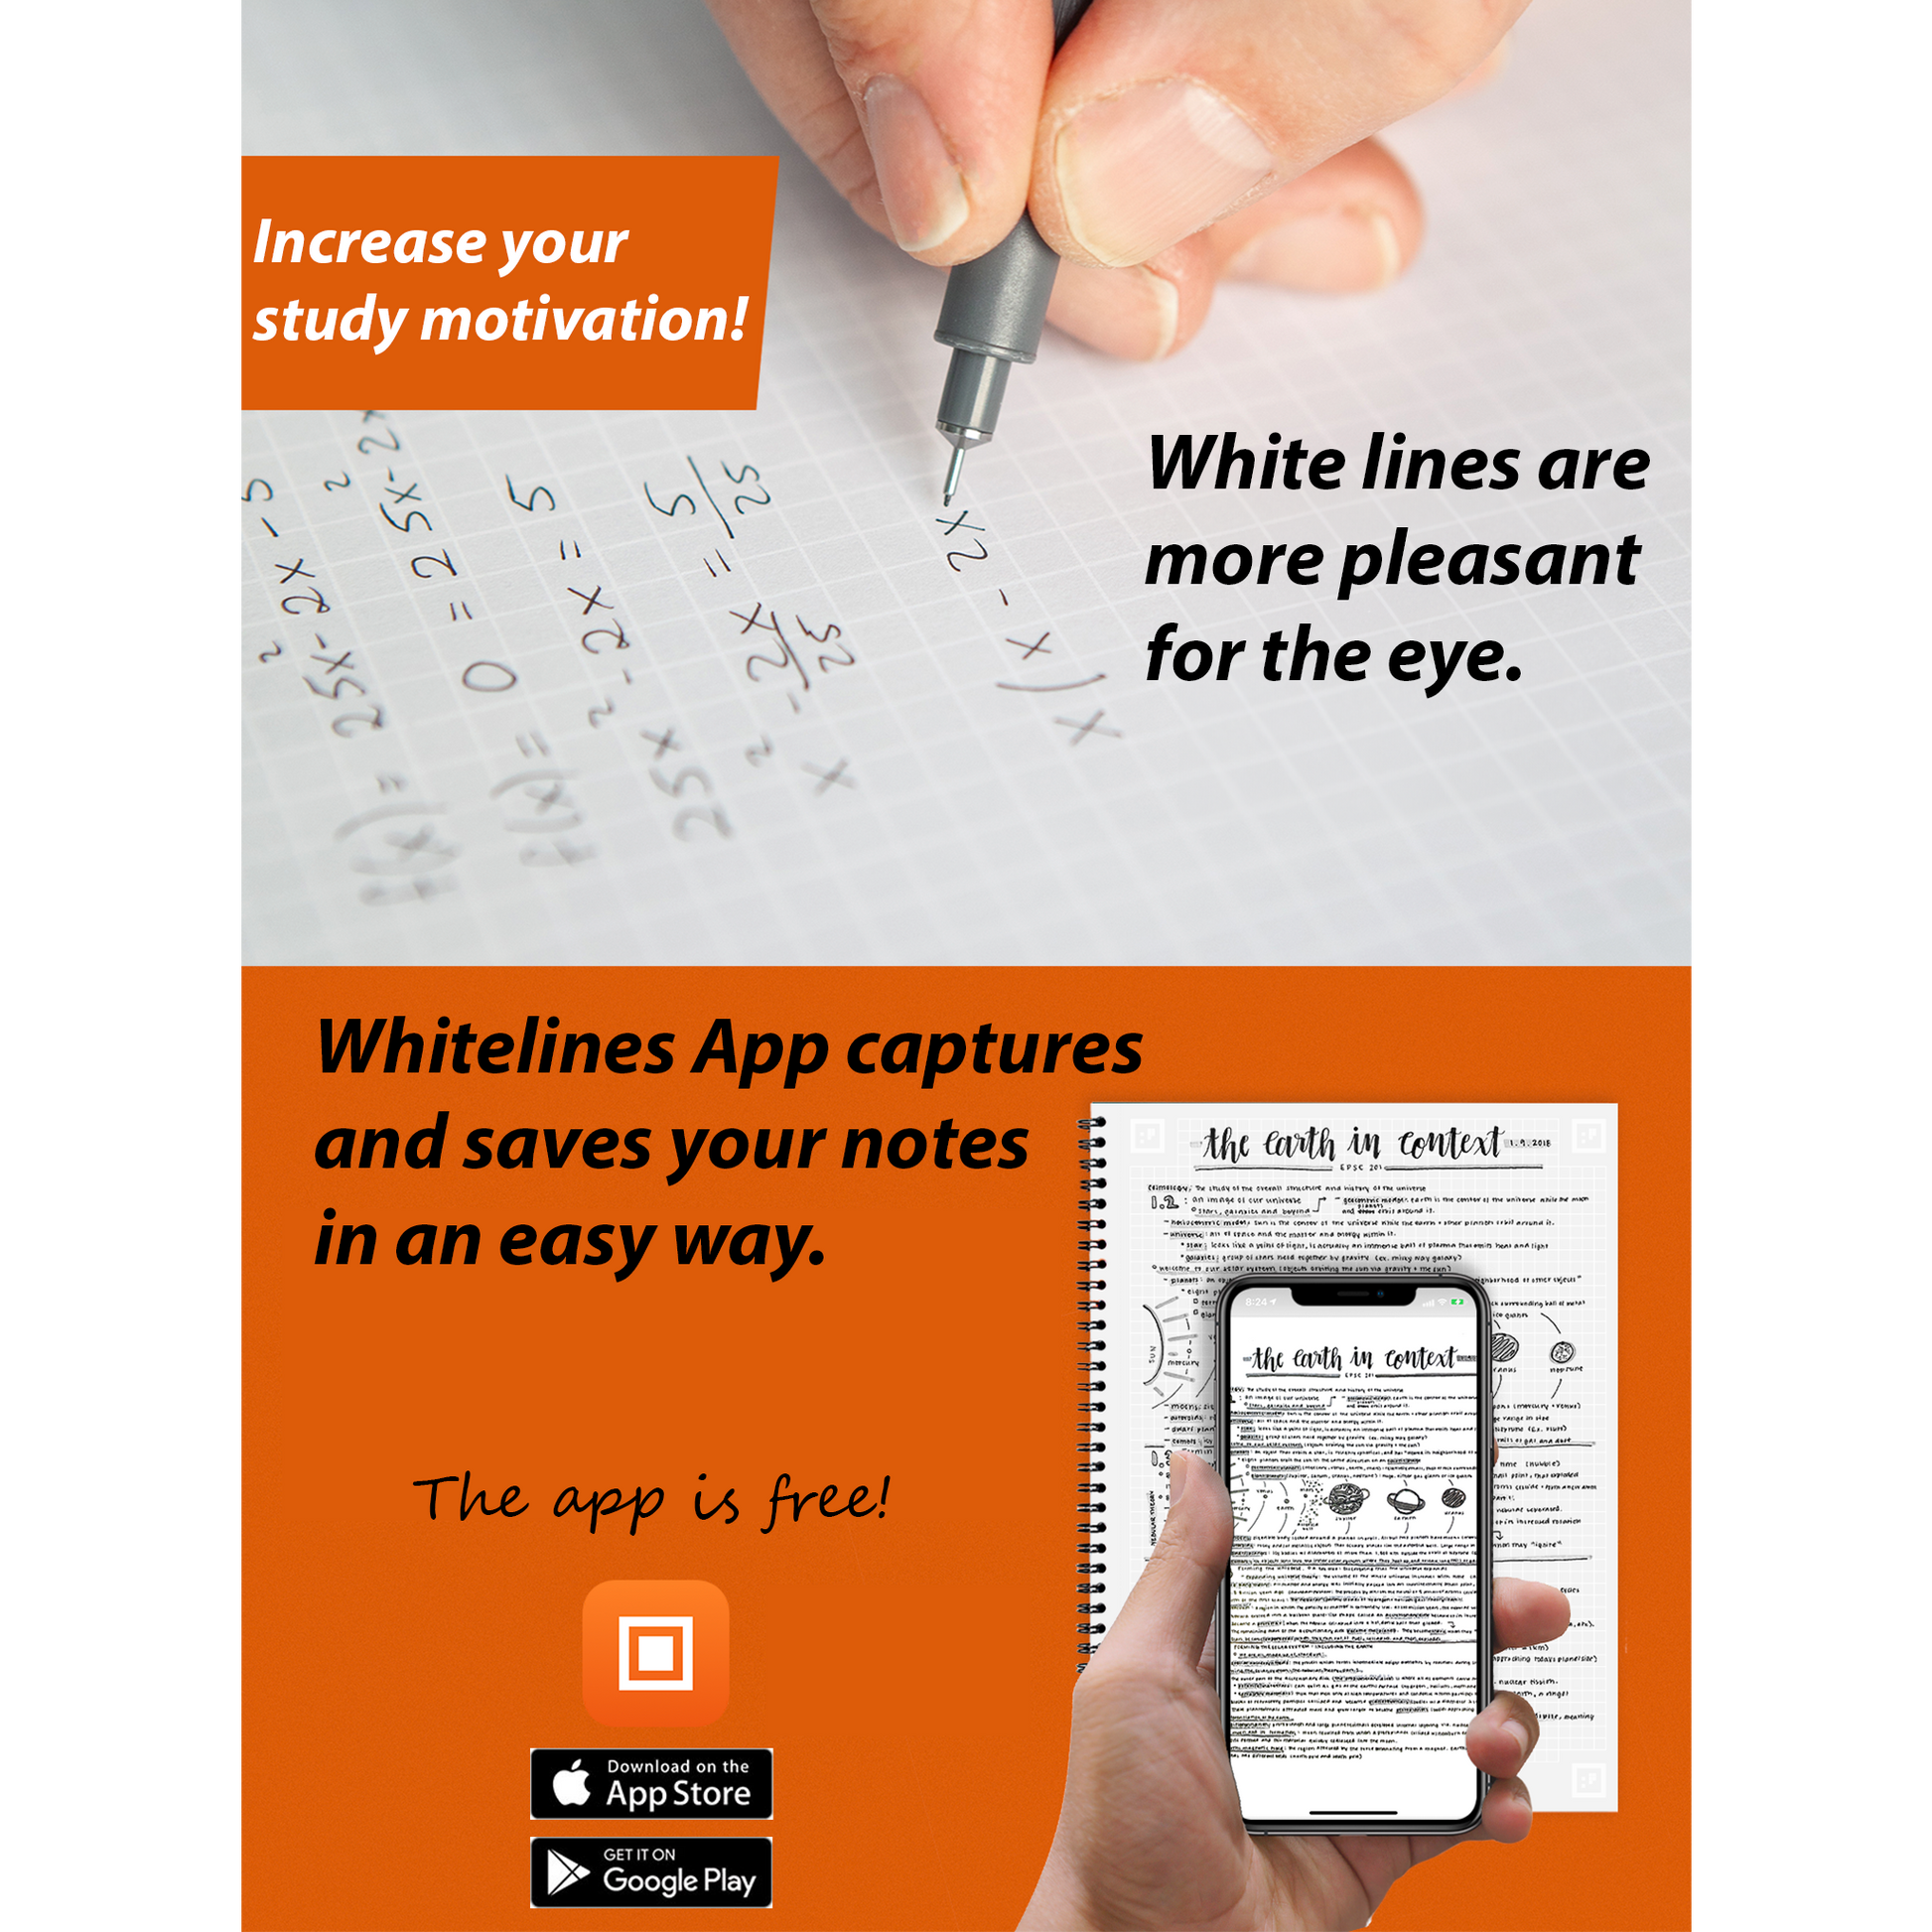 Use the Whitelines App to convert your notes to your mobile phone.